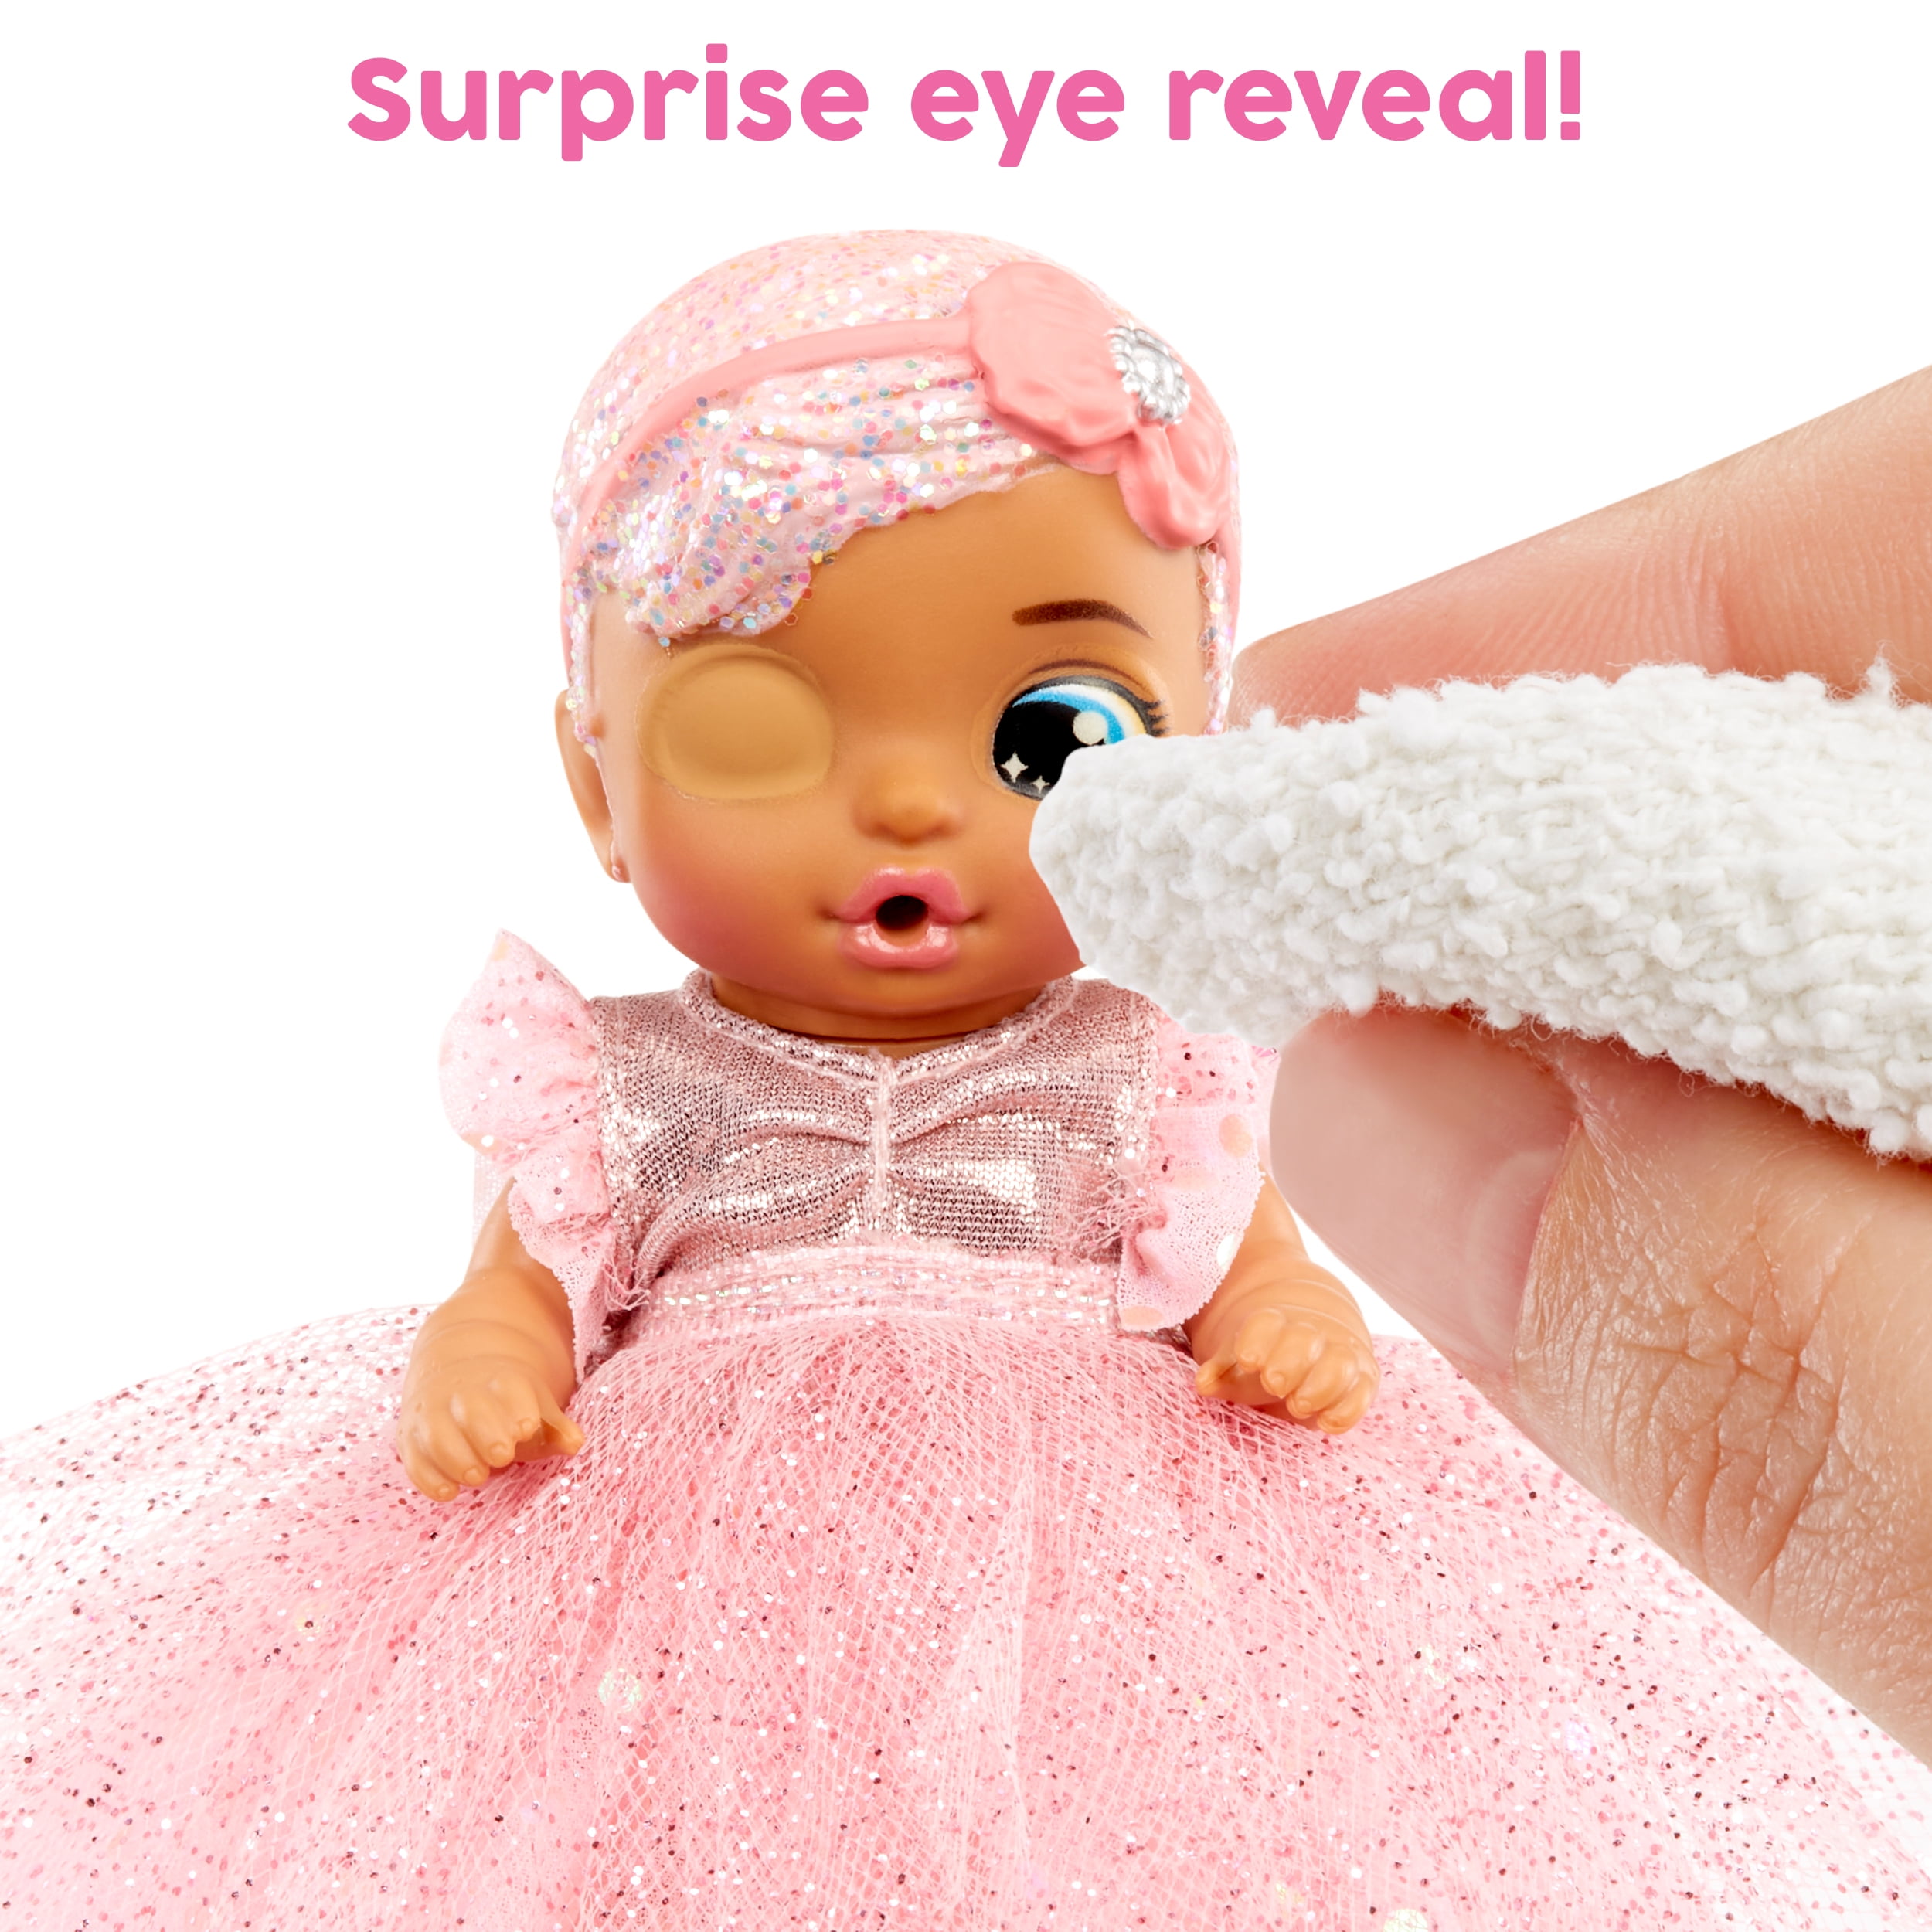 Baby Born Surprise Small Dolls Series 7 4 - Unwrap Surprise Collectible  Baby Doll with 3 Water Surprises, Garden-Themed Outfit, Color Change  Diaper